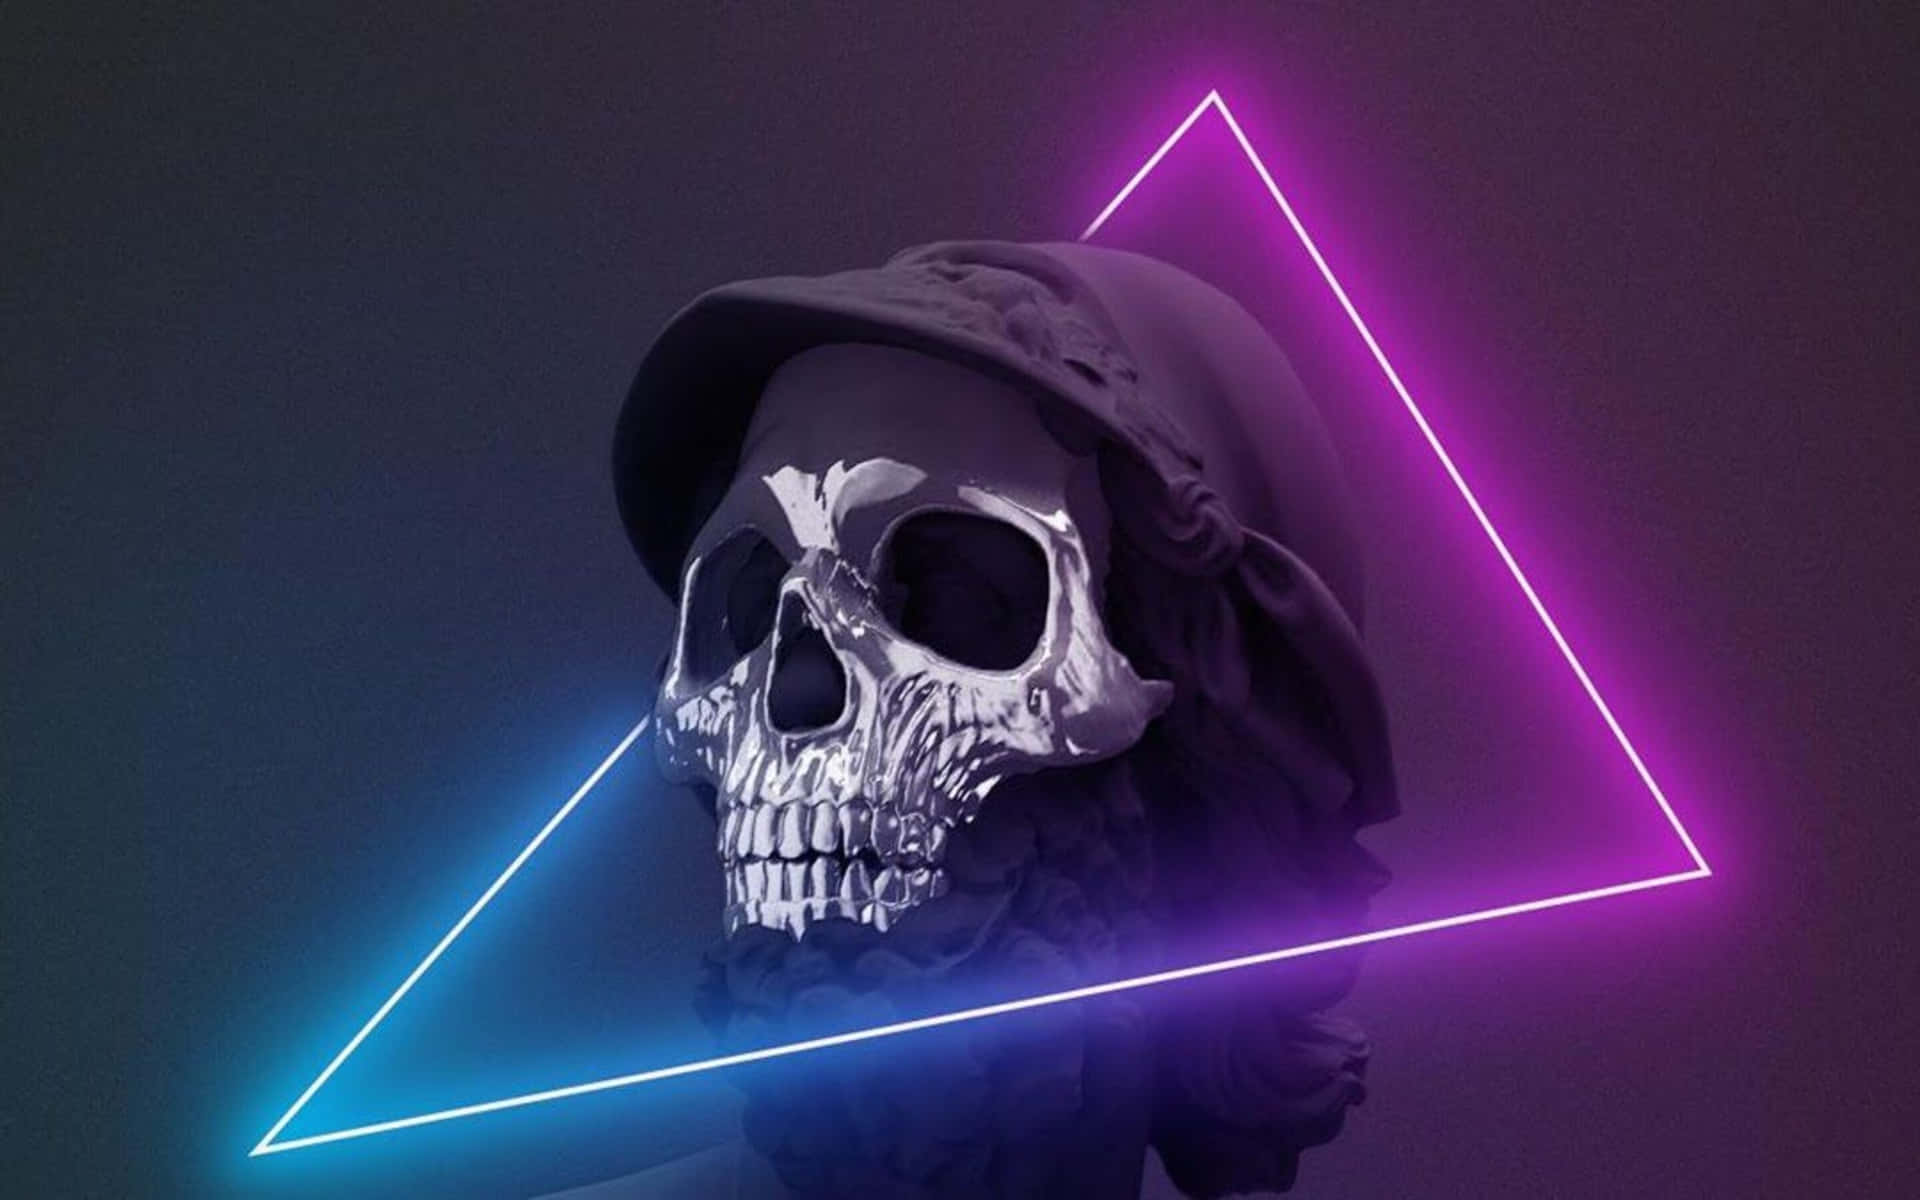 Conquer the galaxy with the Purple Skull Trooper! Wallpaper